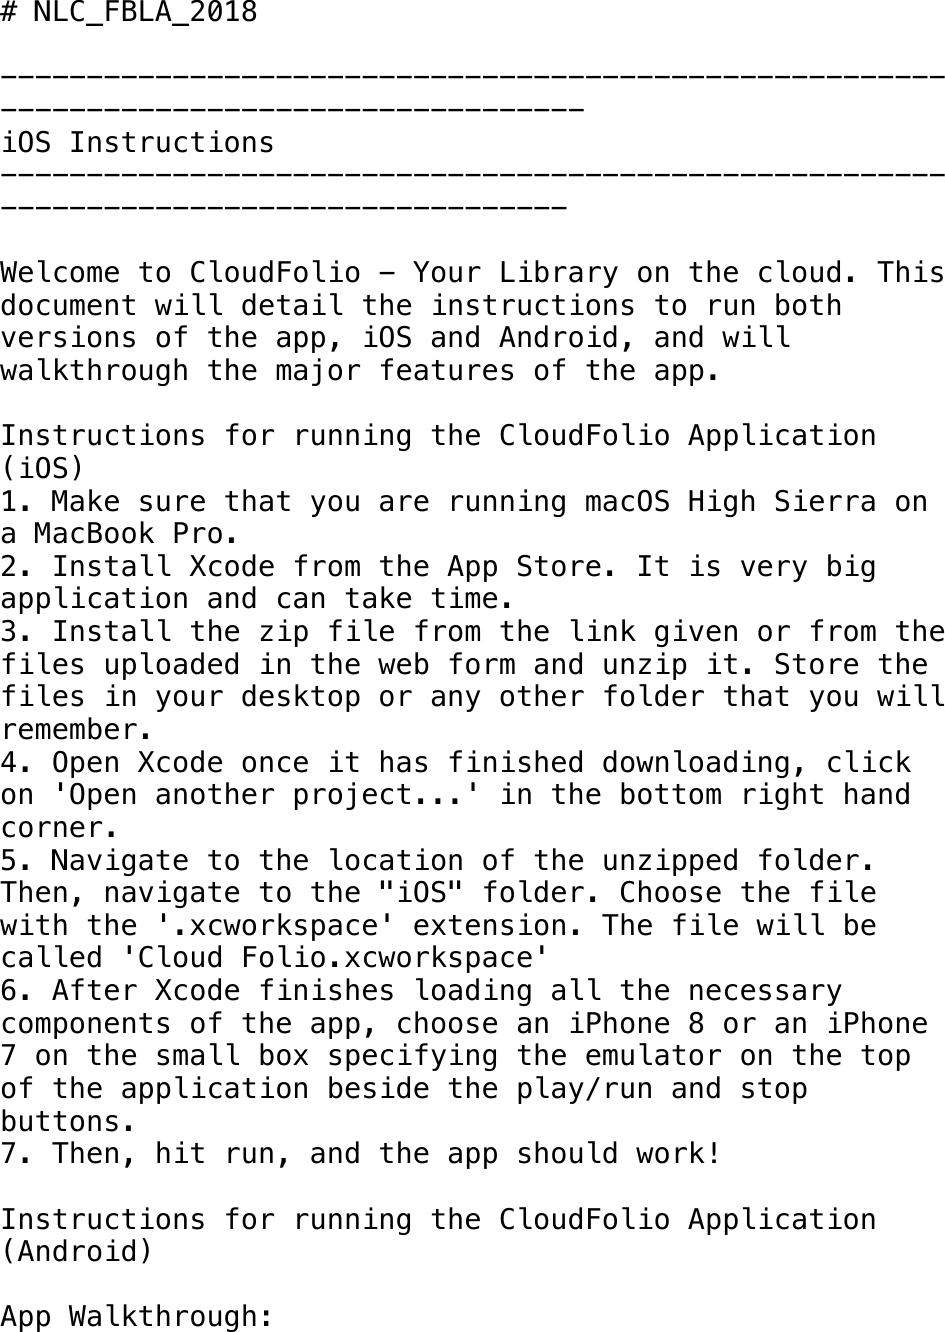 Page 1 of 10 - Cloud Folio Instructions